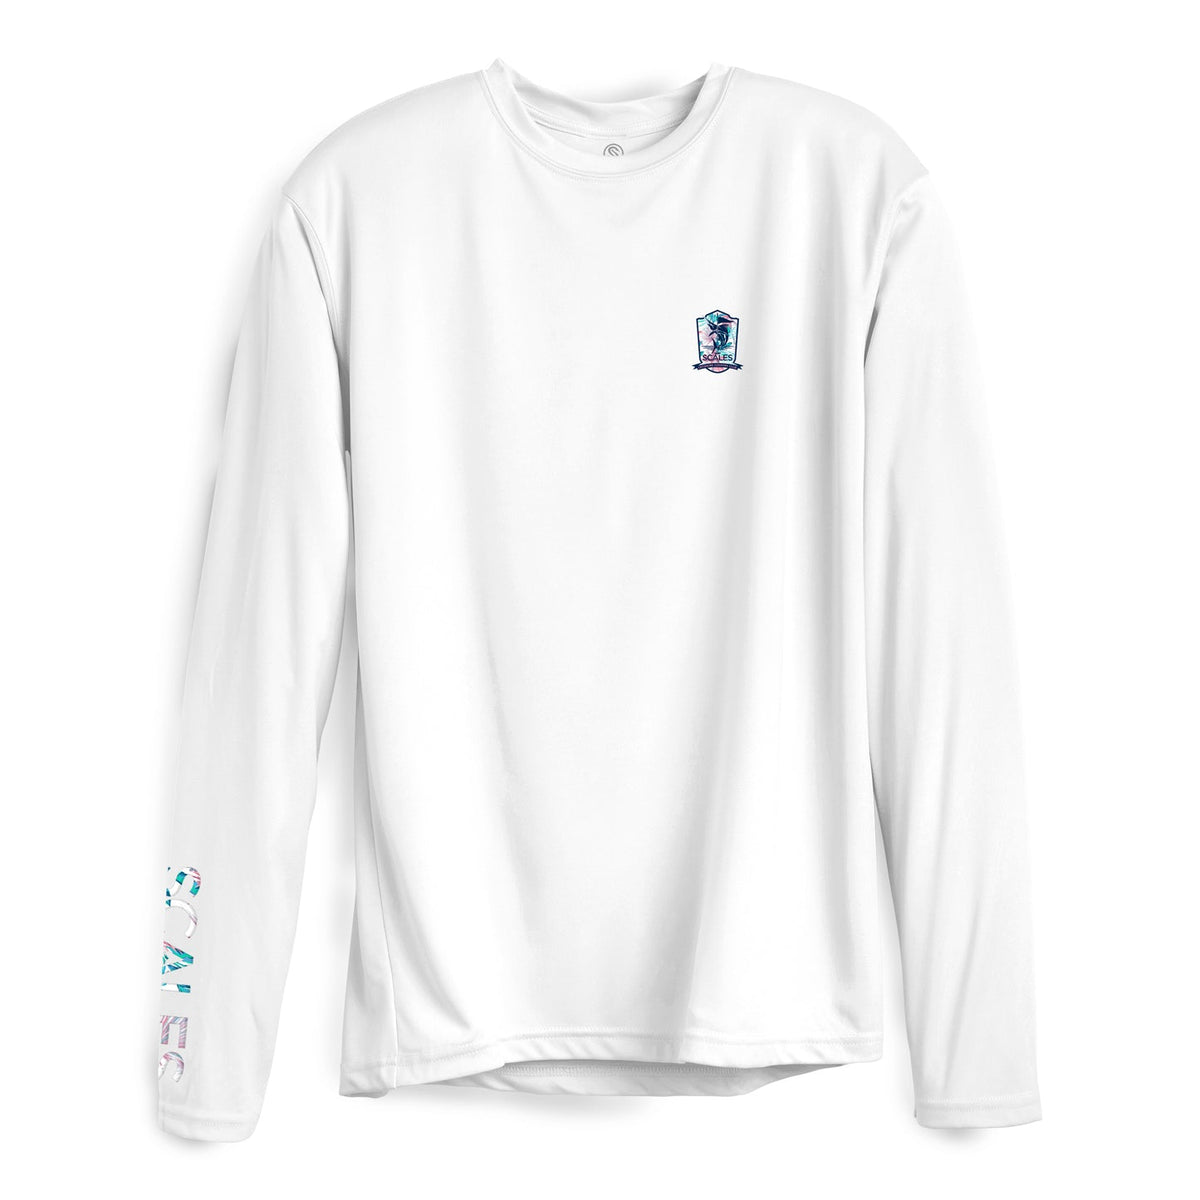 SCALES Tropical Country Club Long Sleeve Performance Shirt